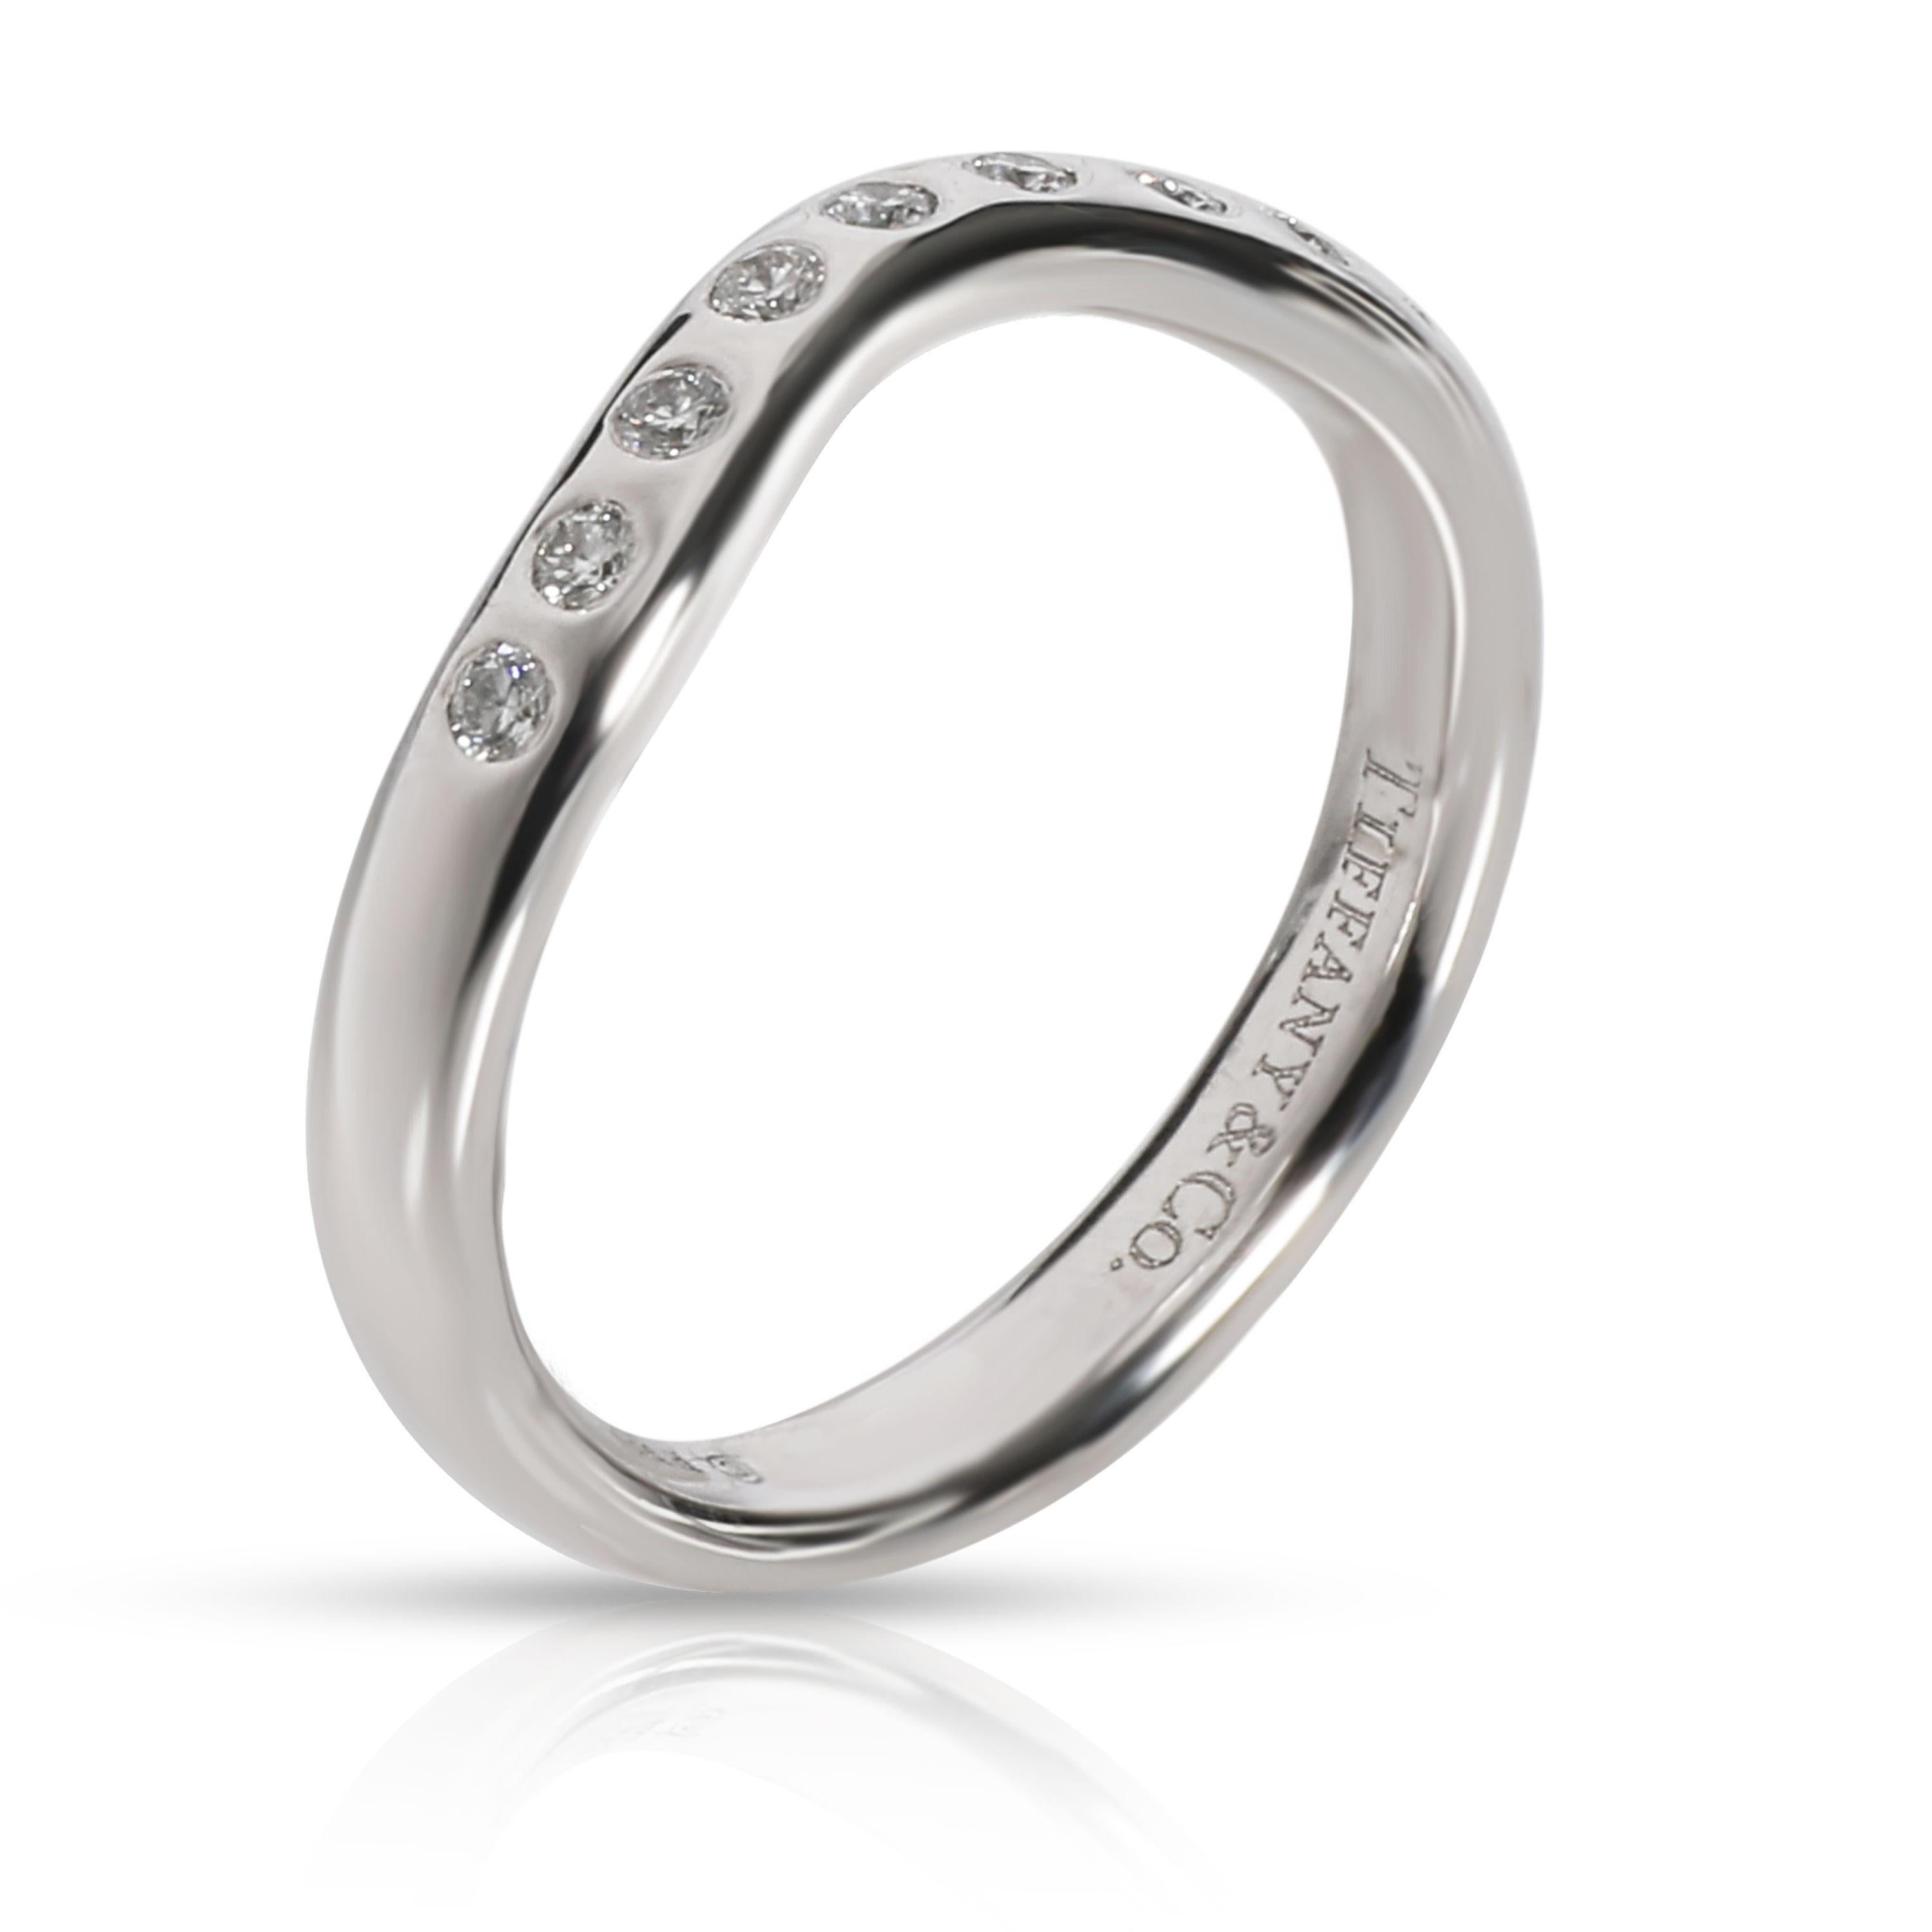 Tiffany & Co. Elsa Peretti Wave Diamond Wedding Band in Platinum 0.06 CTW

PRIMARY DETAILS
SKU: 108013
Listing Title: Tiffany & Co. Elsa Peretti Wave Diamond Wedding Band in Platinum 0.06 CTW
Condition Description: Retails for 2,350 USD. In